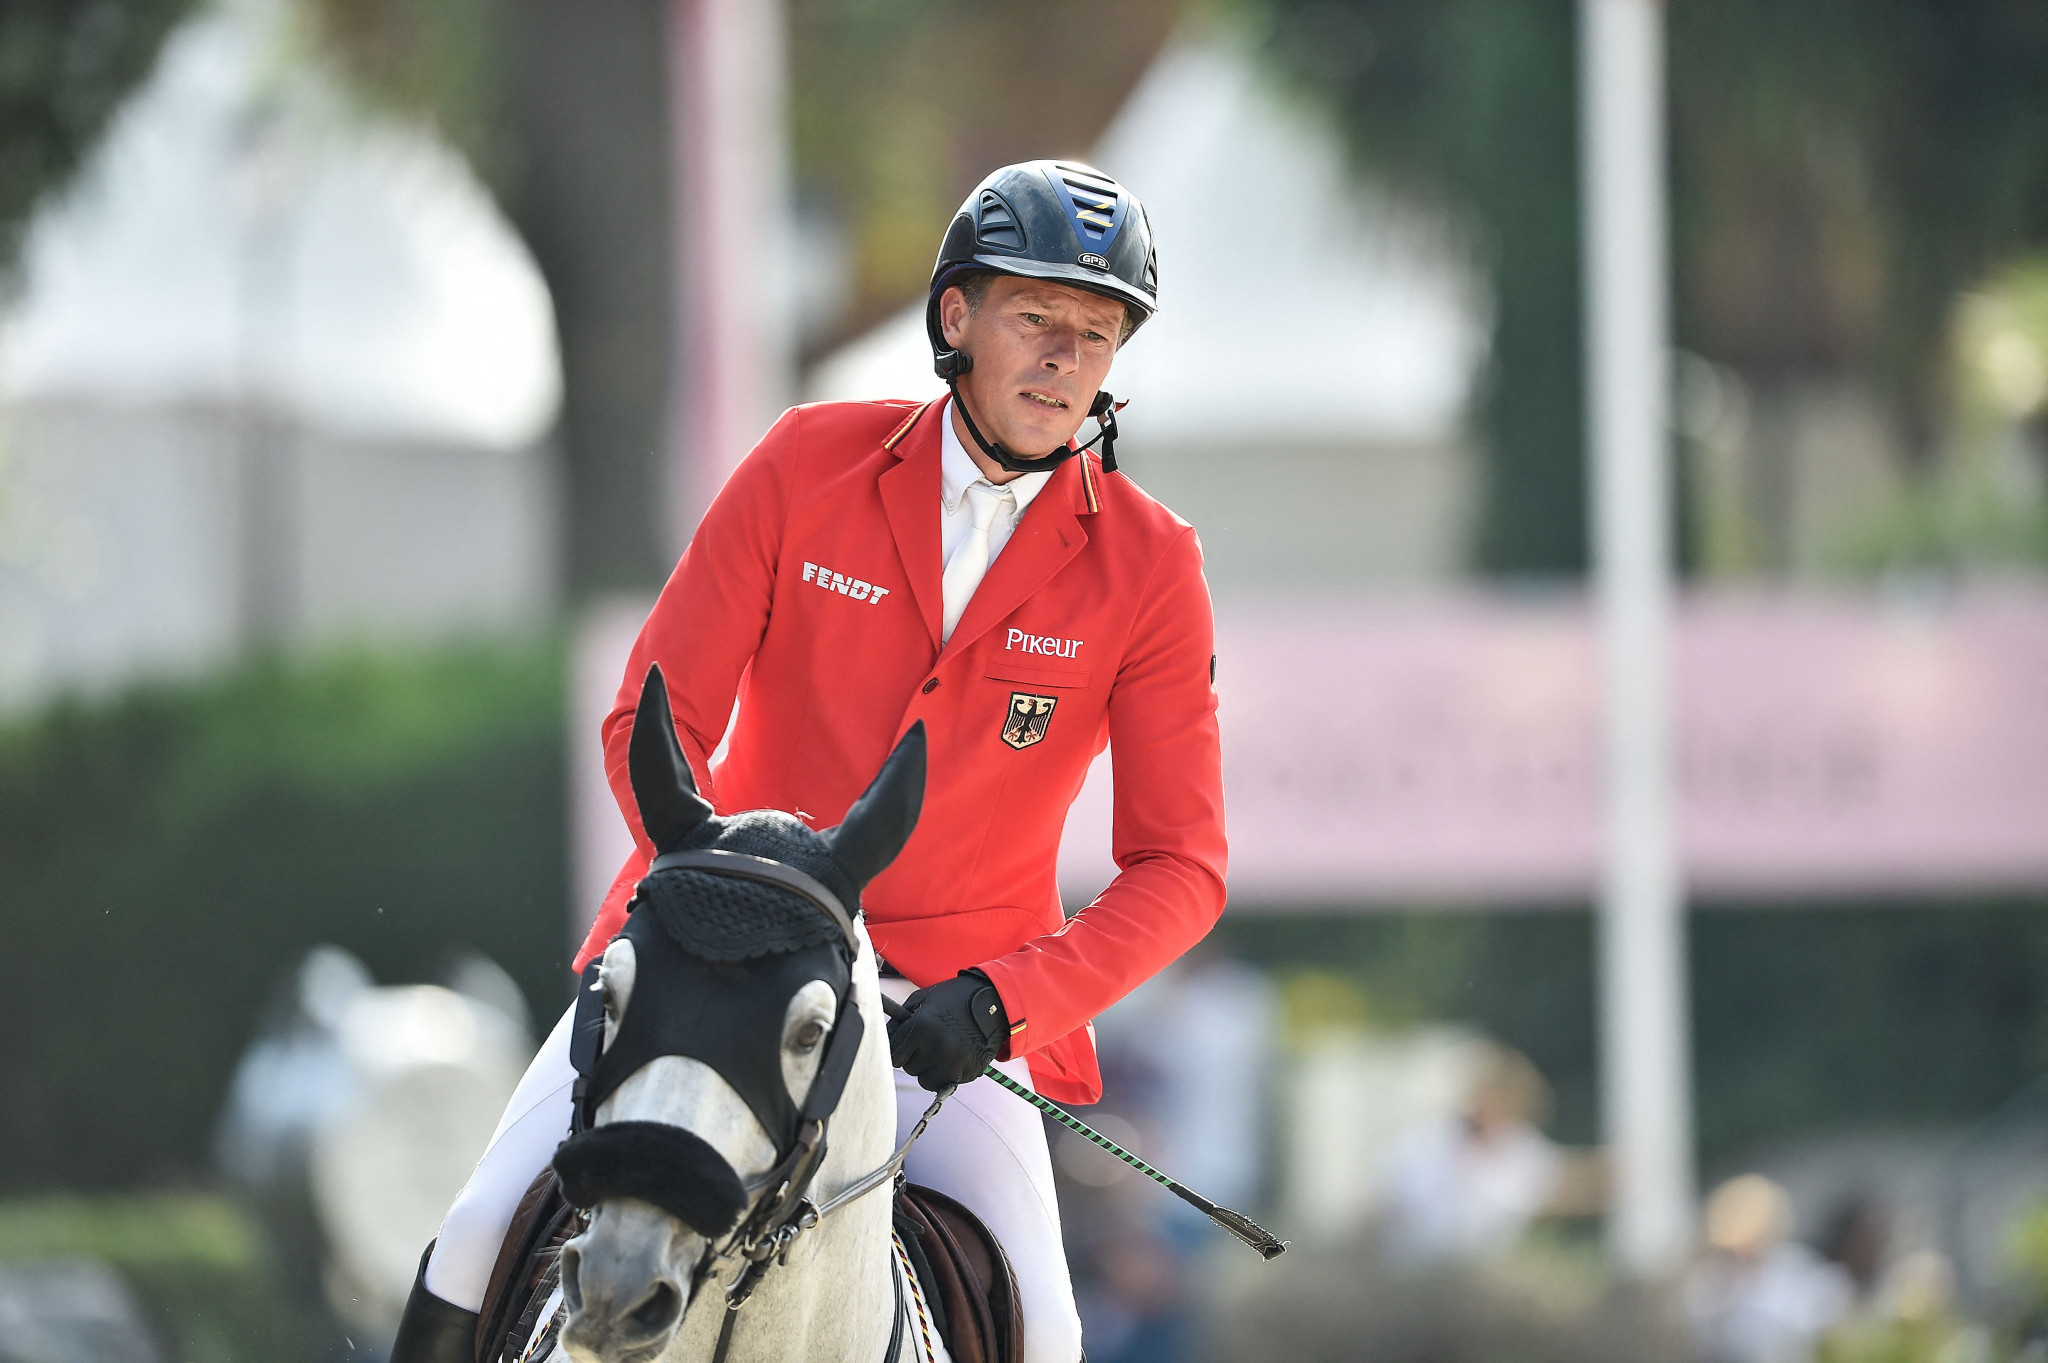 Leading riders set to compete at latest Global Champions Tour leg in Rome